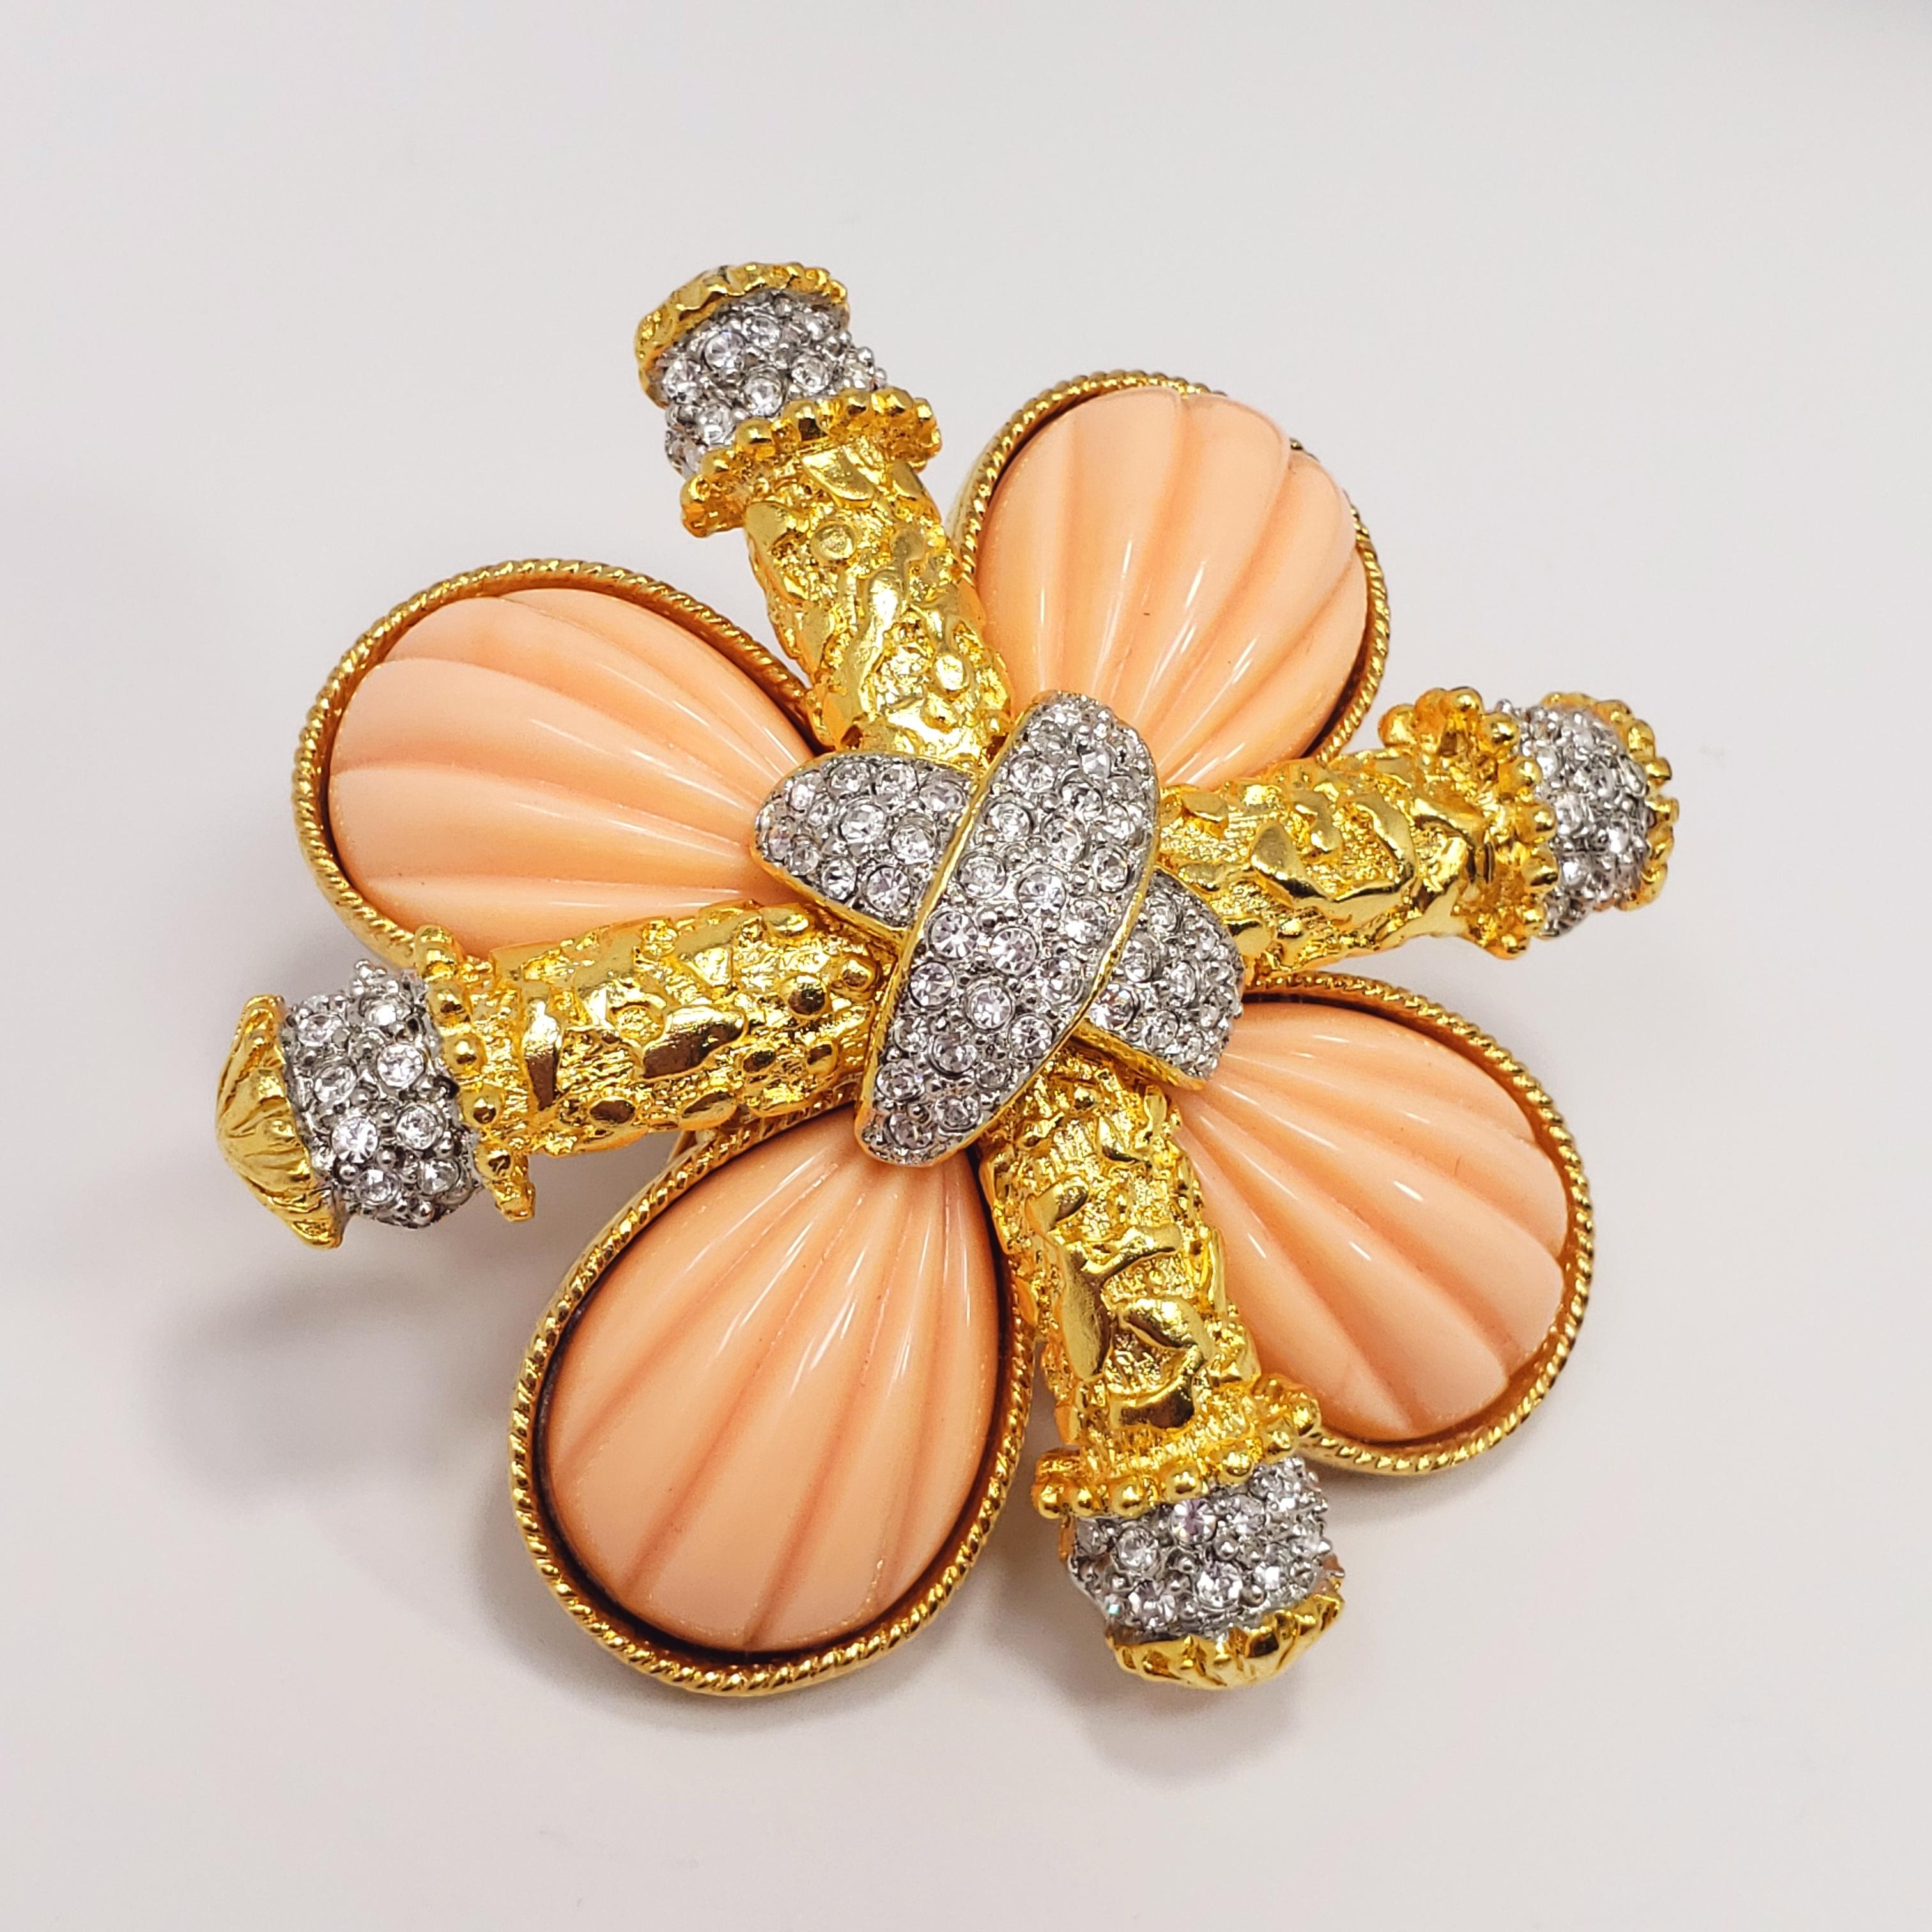 Kenneth Jay Lane maltese-cross style pin/brooch. Carved & polished coral-colored accents, decorated with clear crystals, and set in a gold 22K gold plated, textured, metal setting. The two cross motifs are riveted together into a single stylized